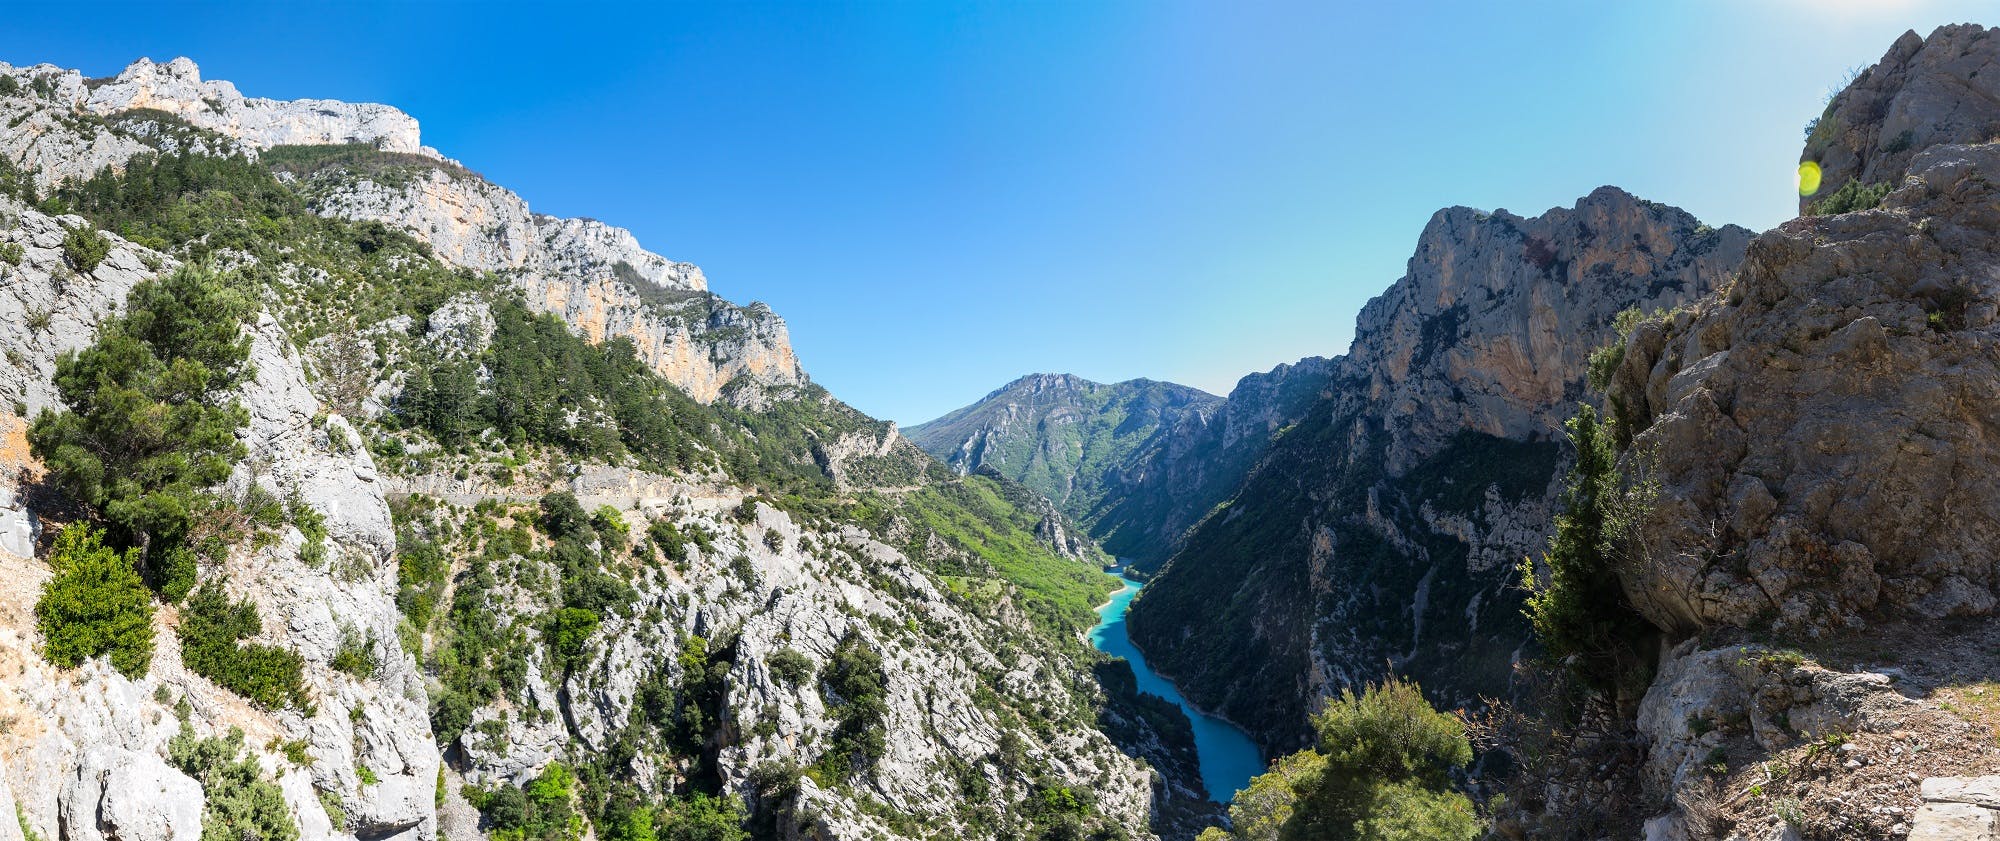 One day tour in Verdon Canyon and Moustiers Sainte Marie from Aix en Provence